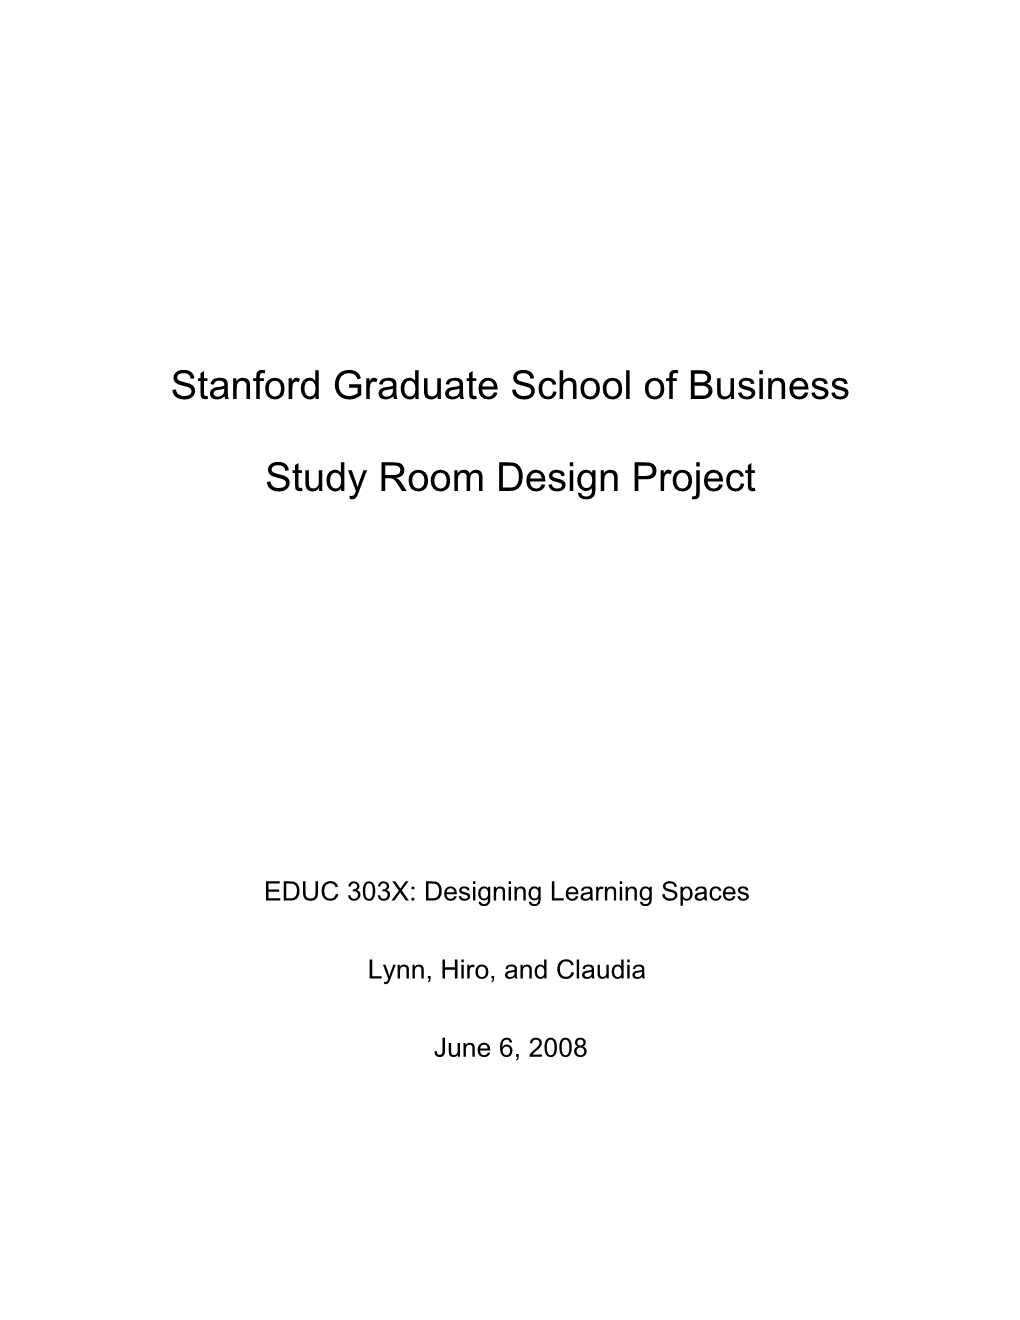 Stanford Graduate School of Business Study Room Design Project